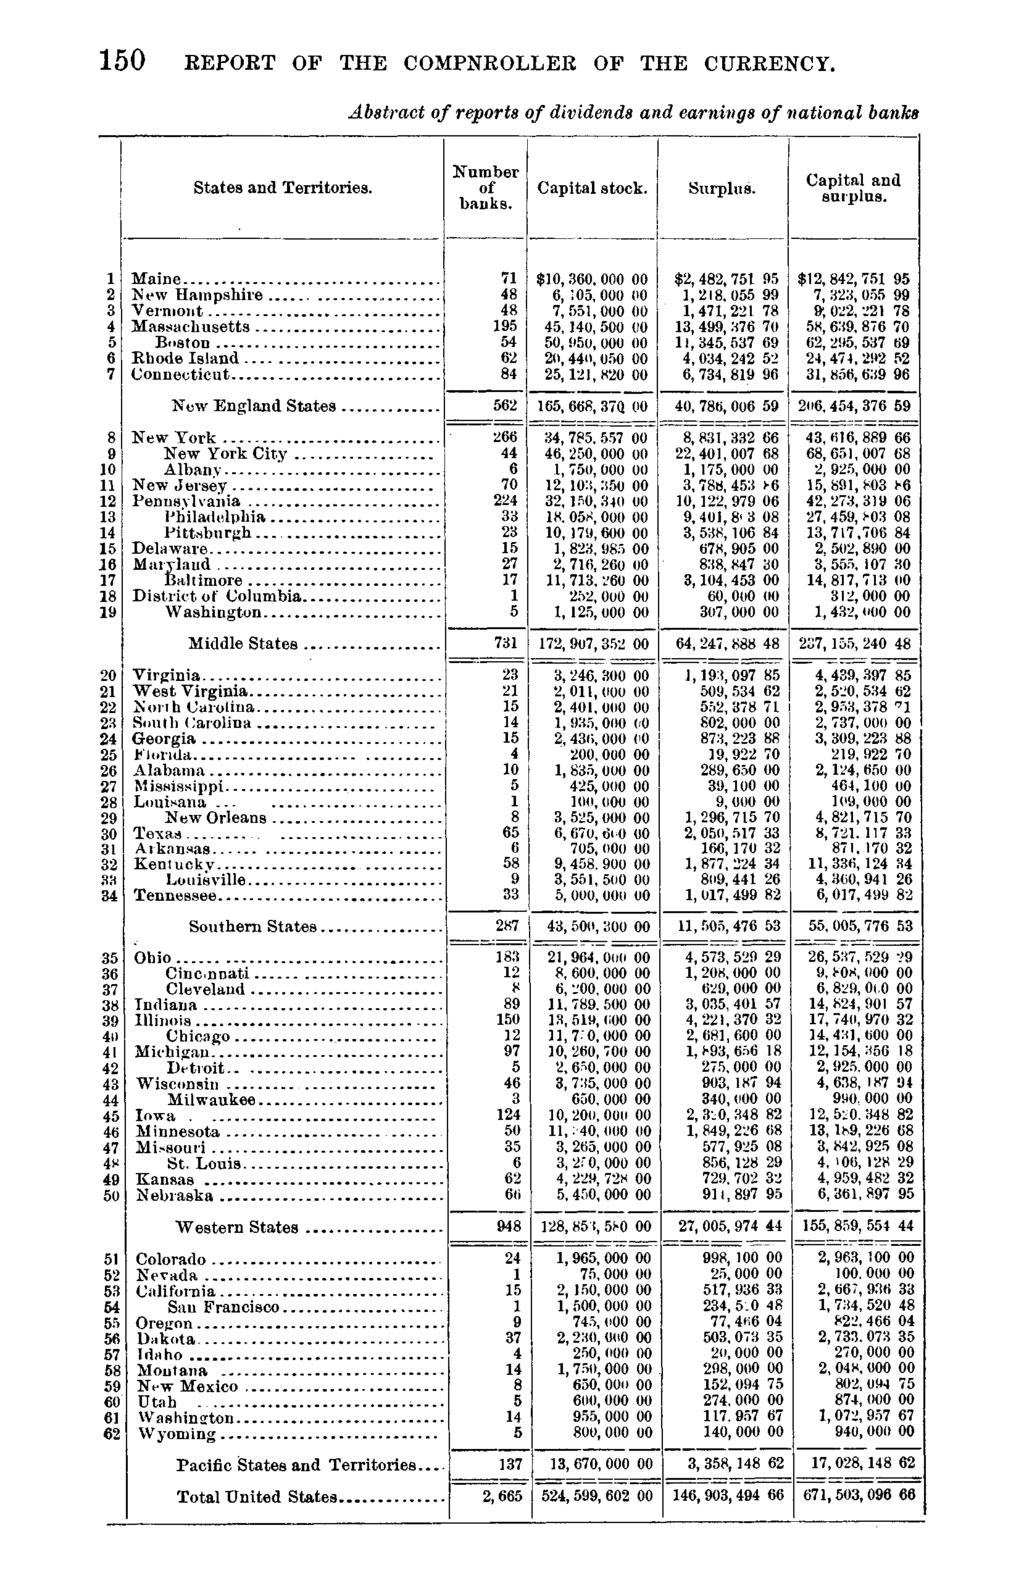 150 KEPOET OF THE COMPNROLLER OF THE CUERENCY. Abstract of reports of dividends and earnings of national banks States and Territories. Number of banks. Capital stock. Surplus. Capital and surplus.